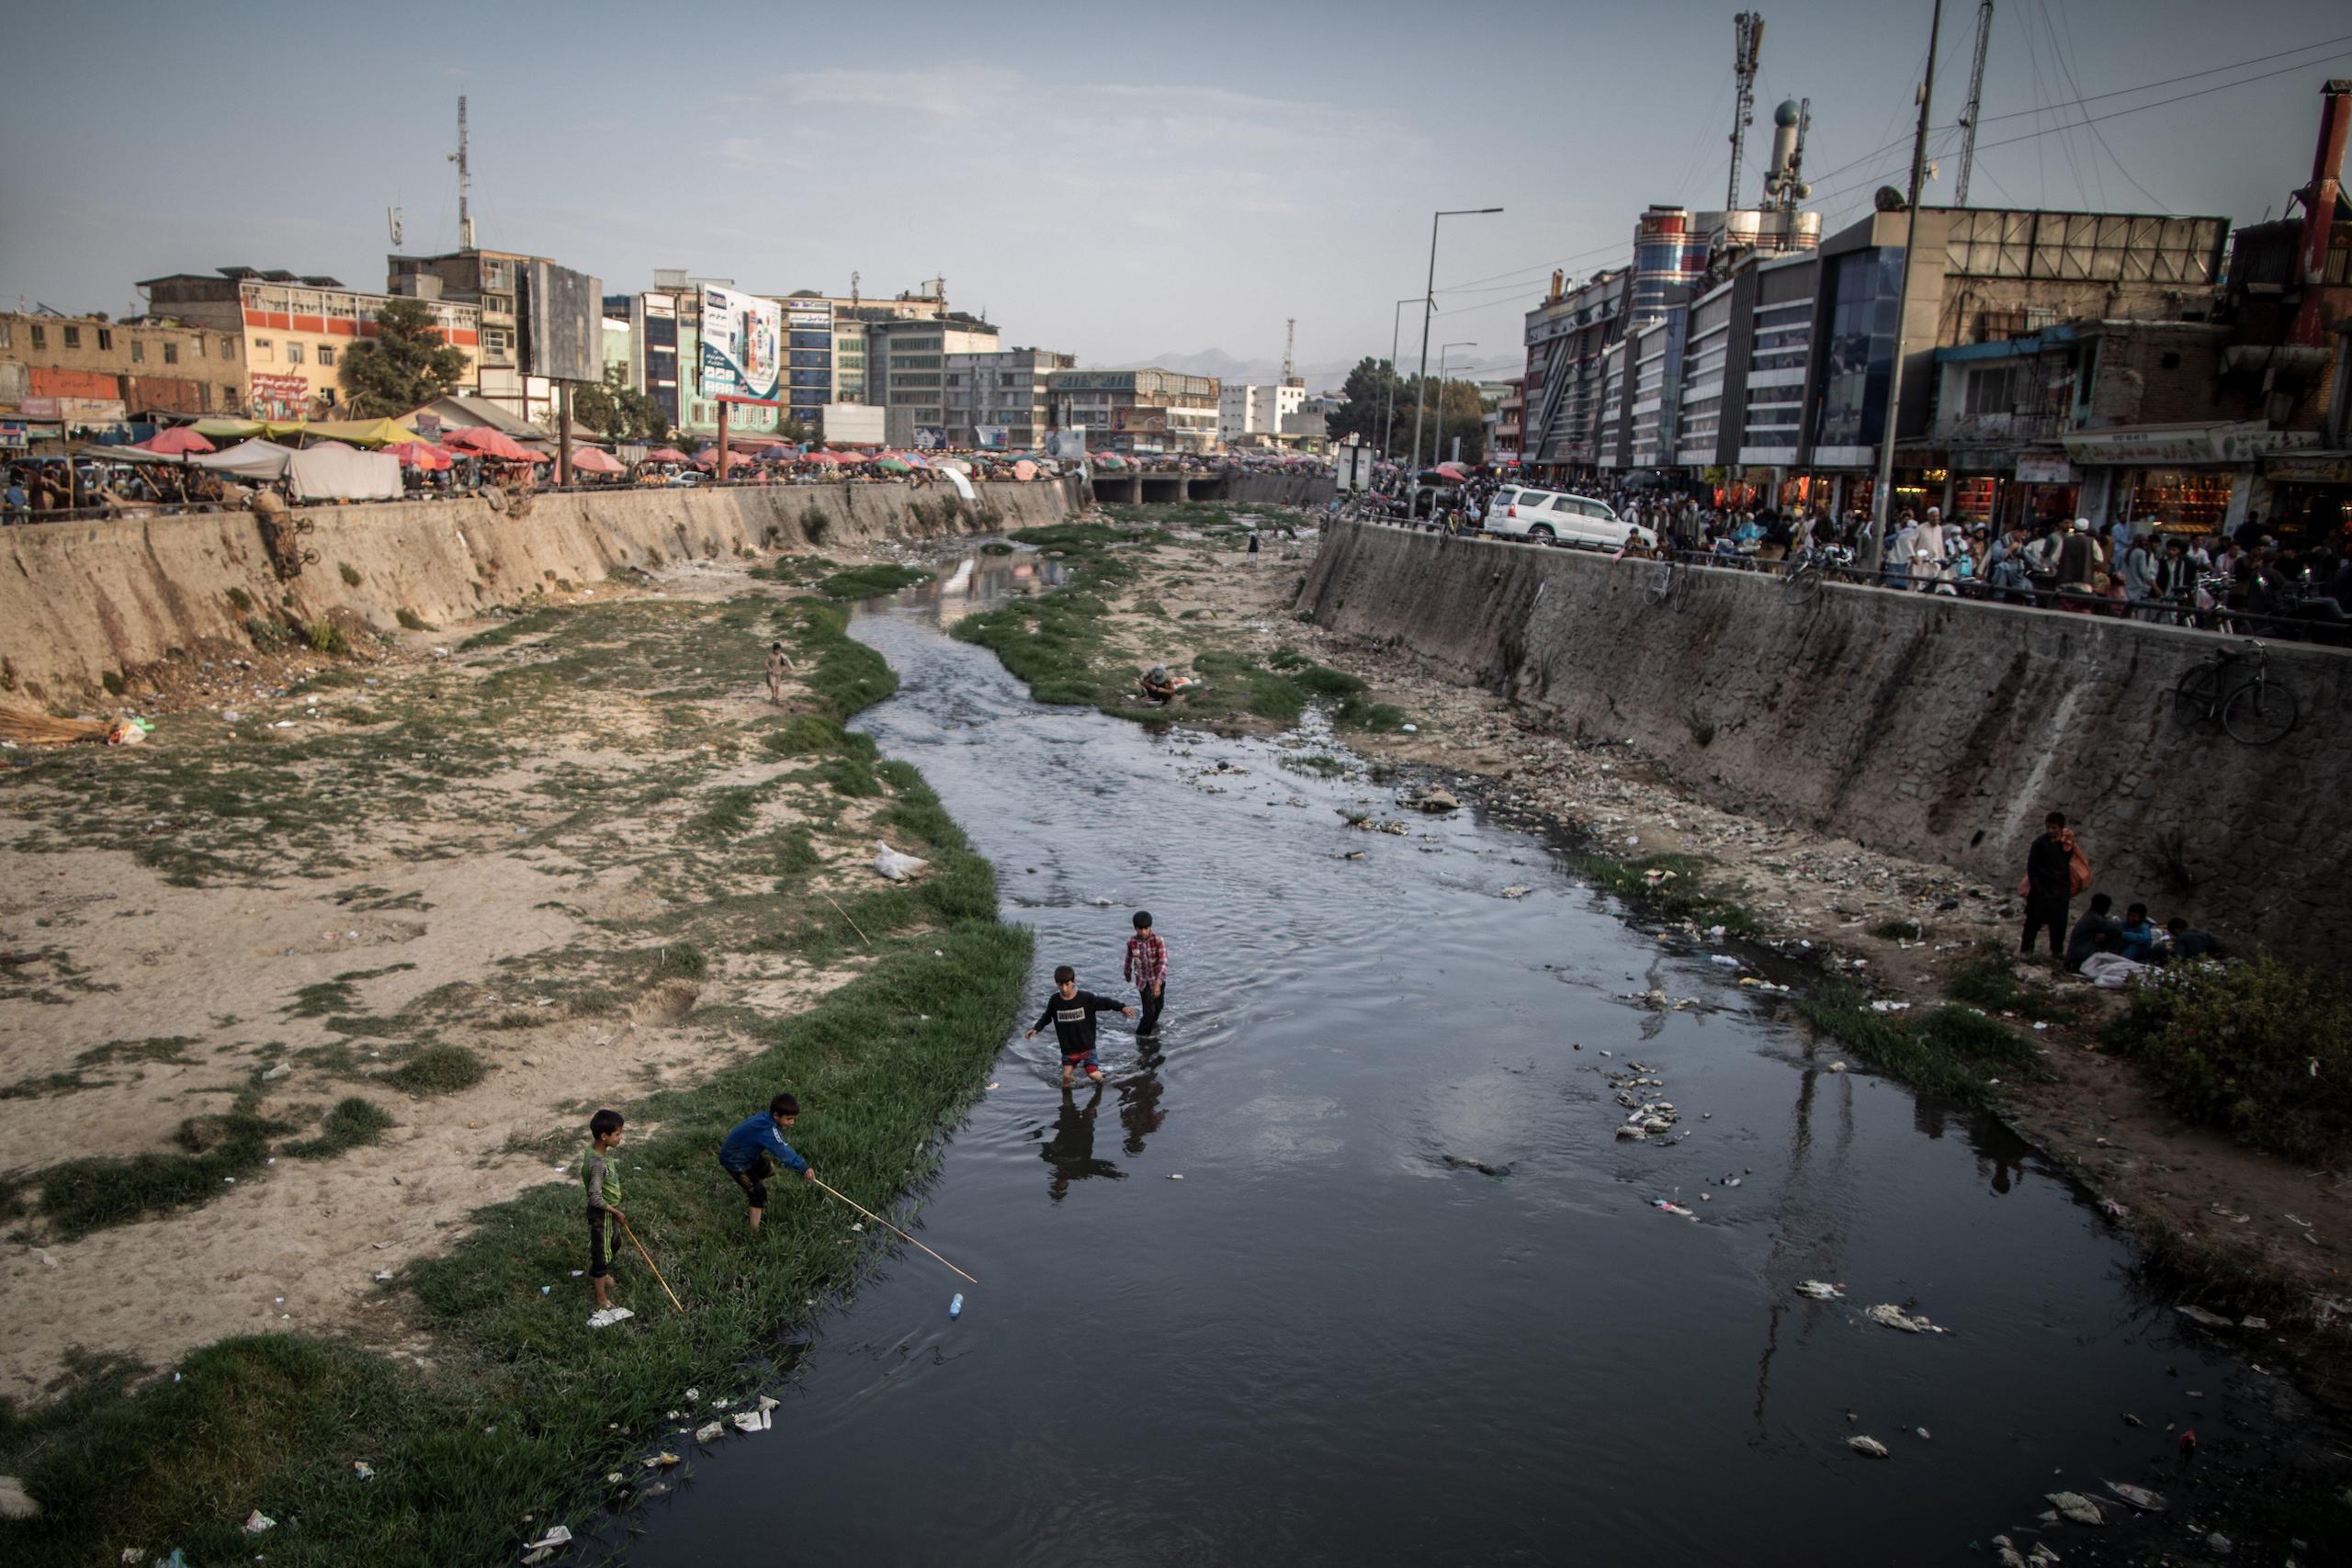 <p>Boys race to fish a plastic bottle out of the heavily polluted and littered Kabul River in Kabul, Afghanistan, in September 2021. The bottles can be sold on for recycling for small amounts of money. (Image: Oliver Weiken / Alamy)</p>